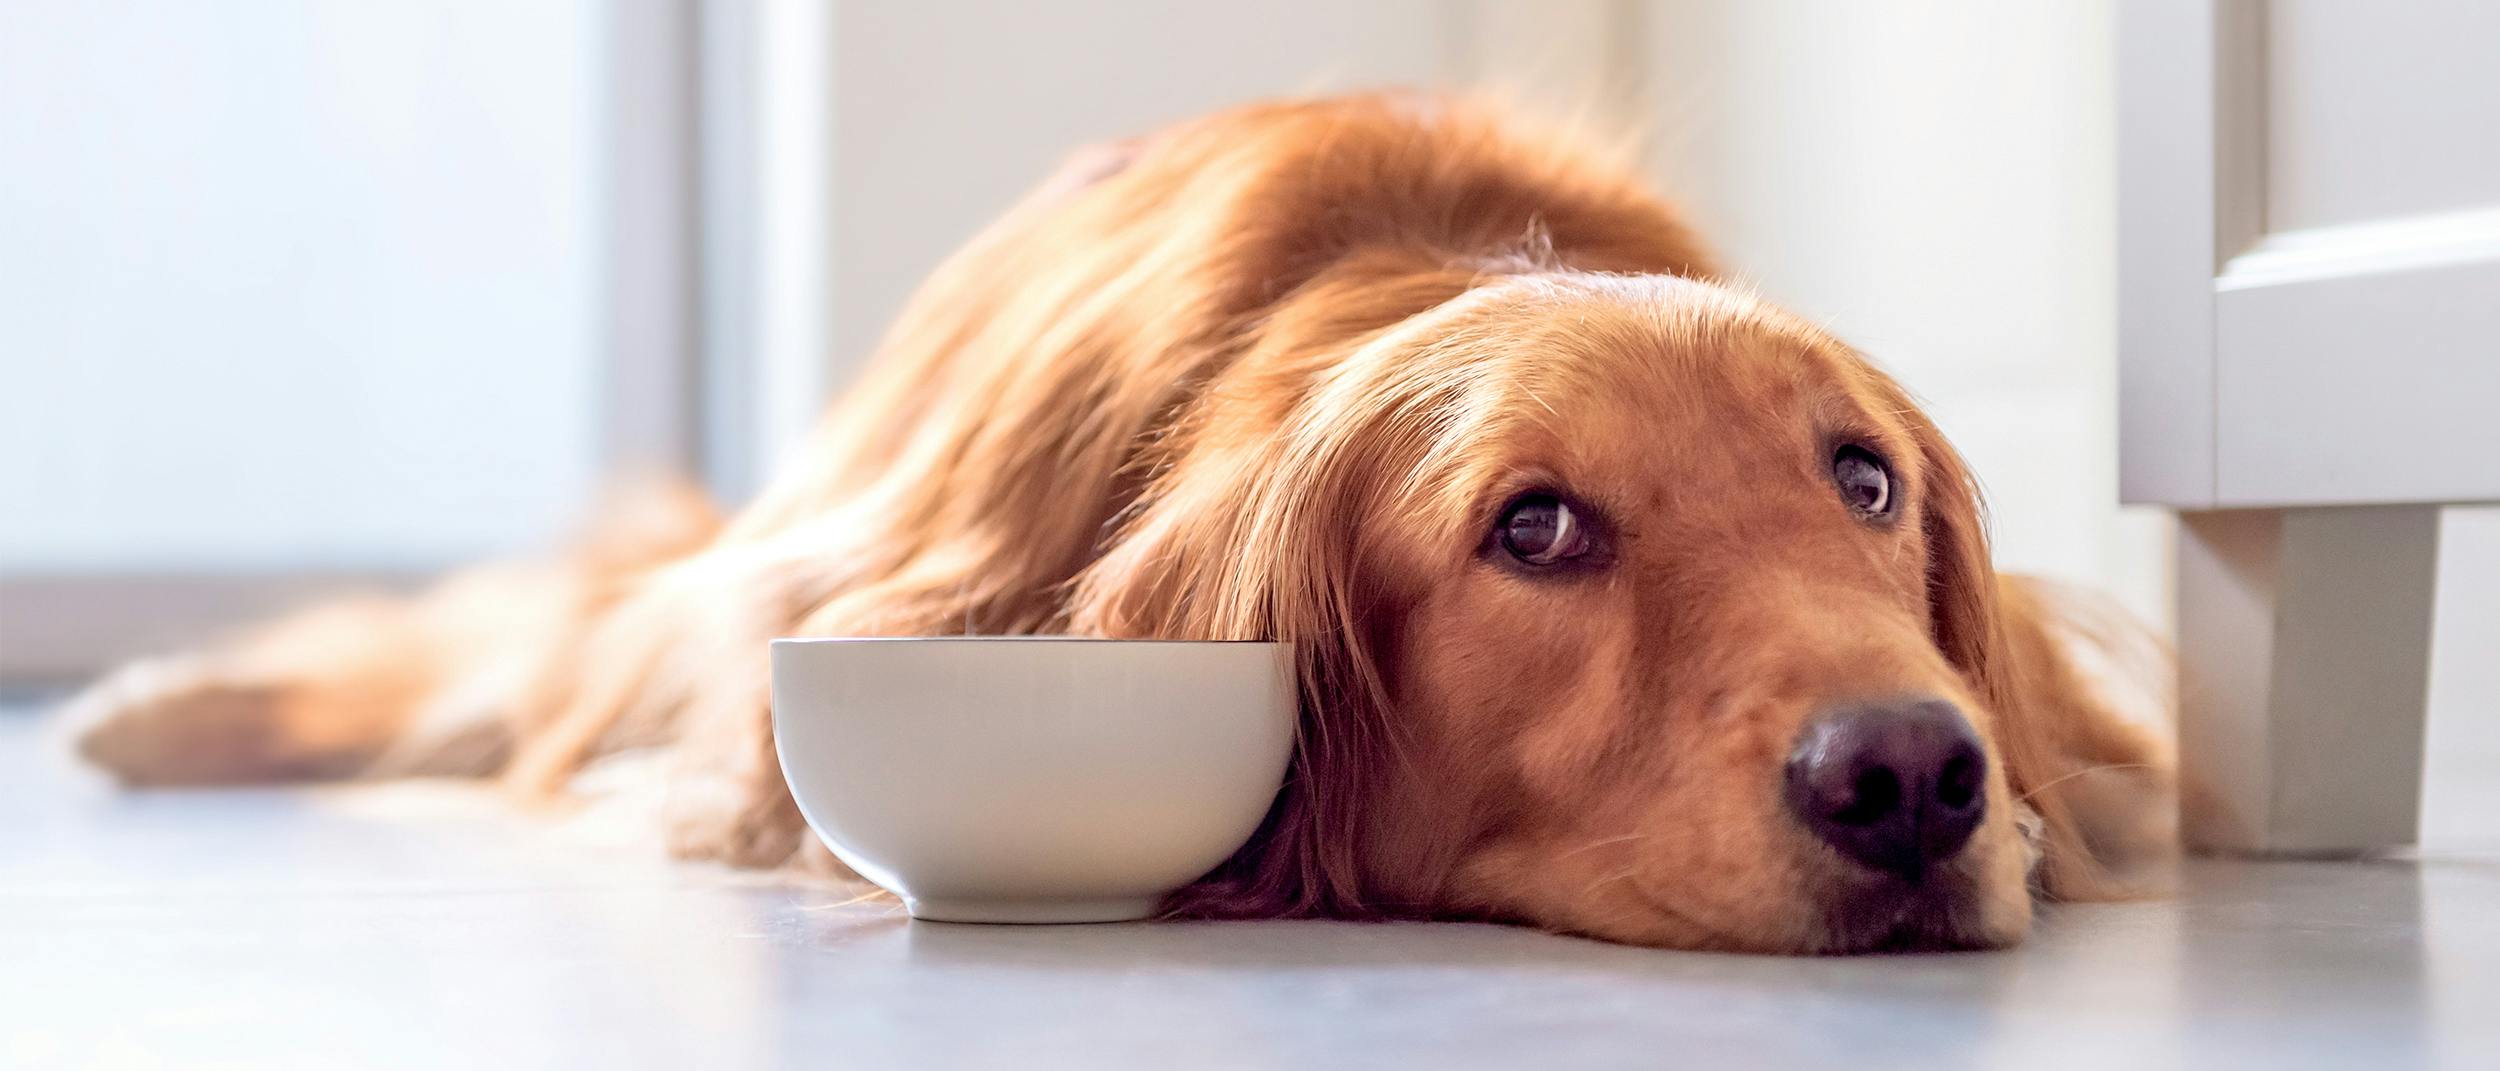 can pancreatitis in dogs cause weight loss